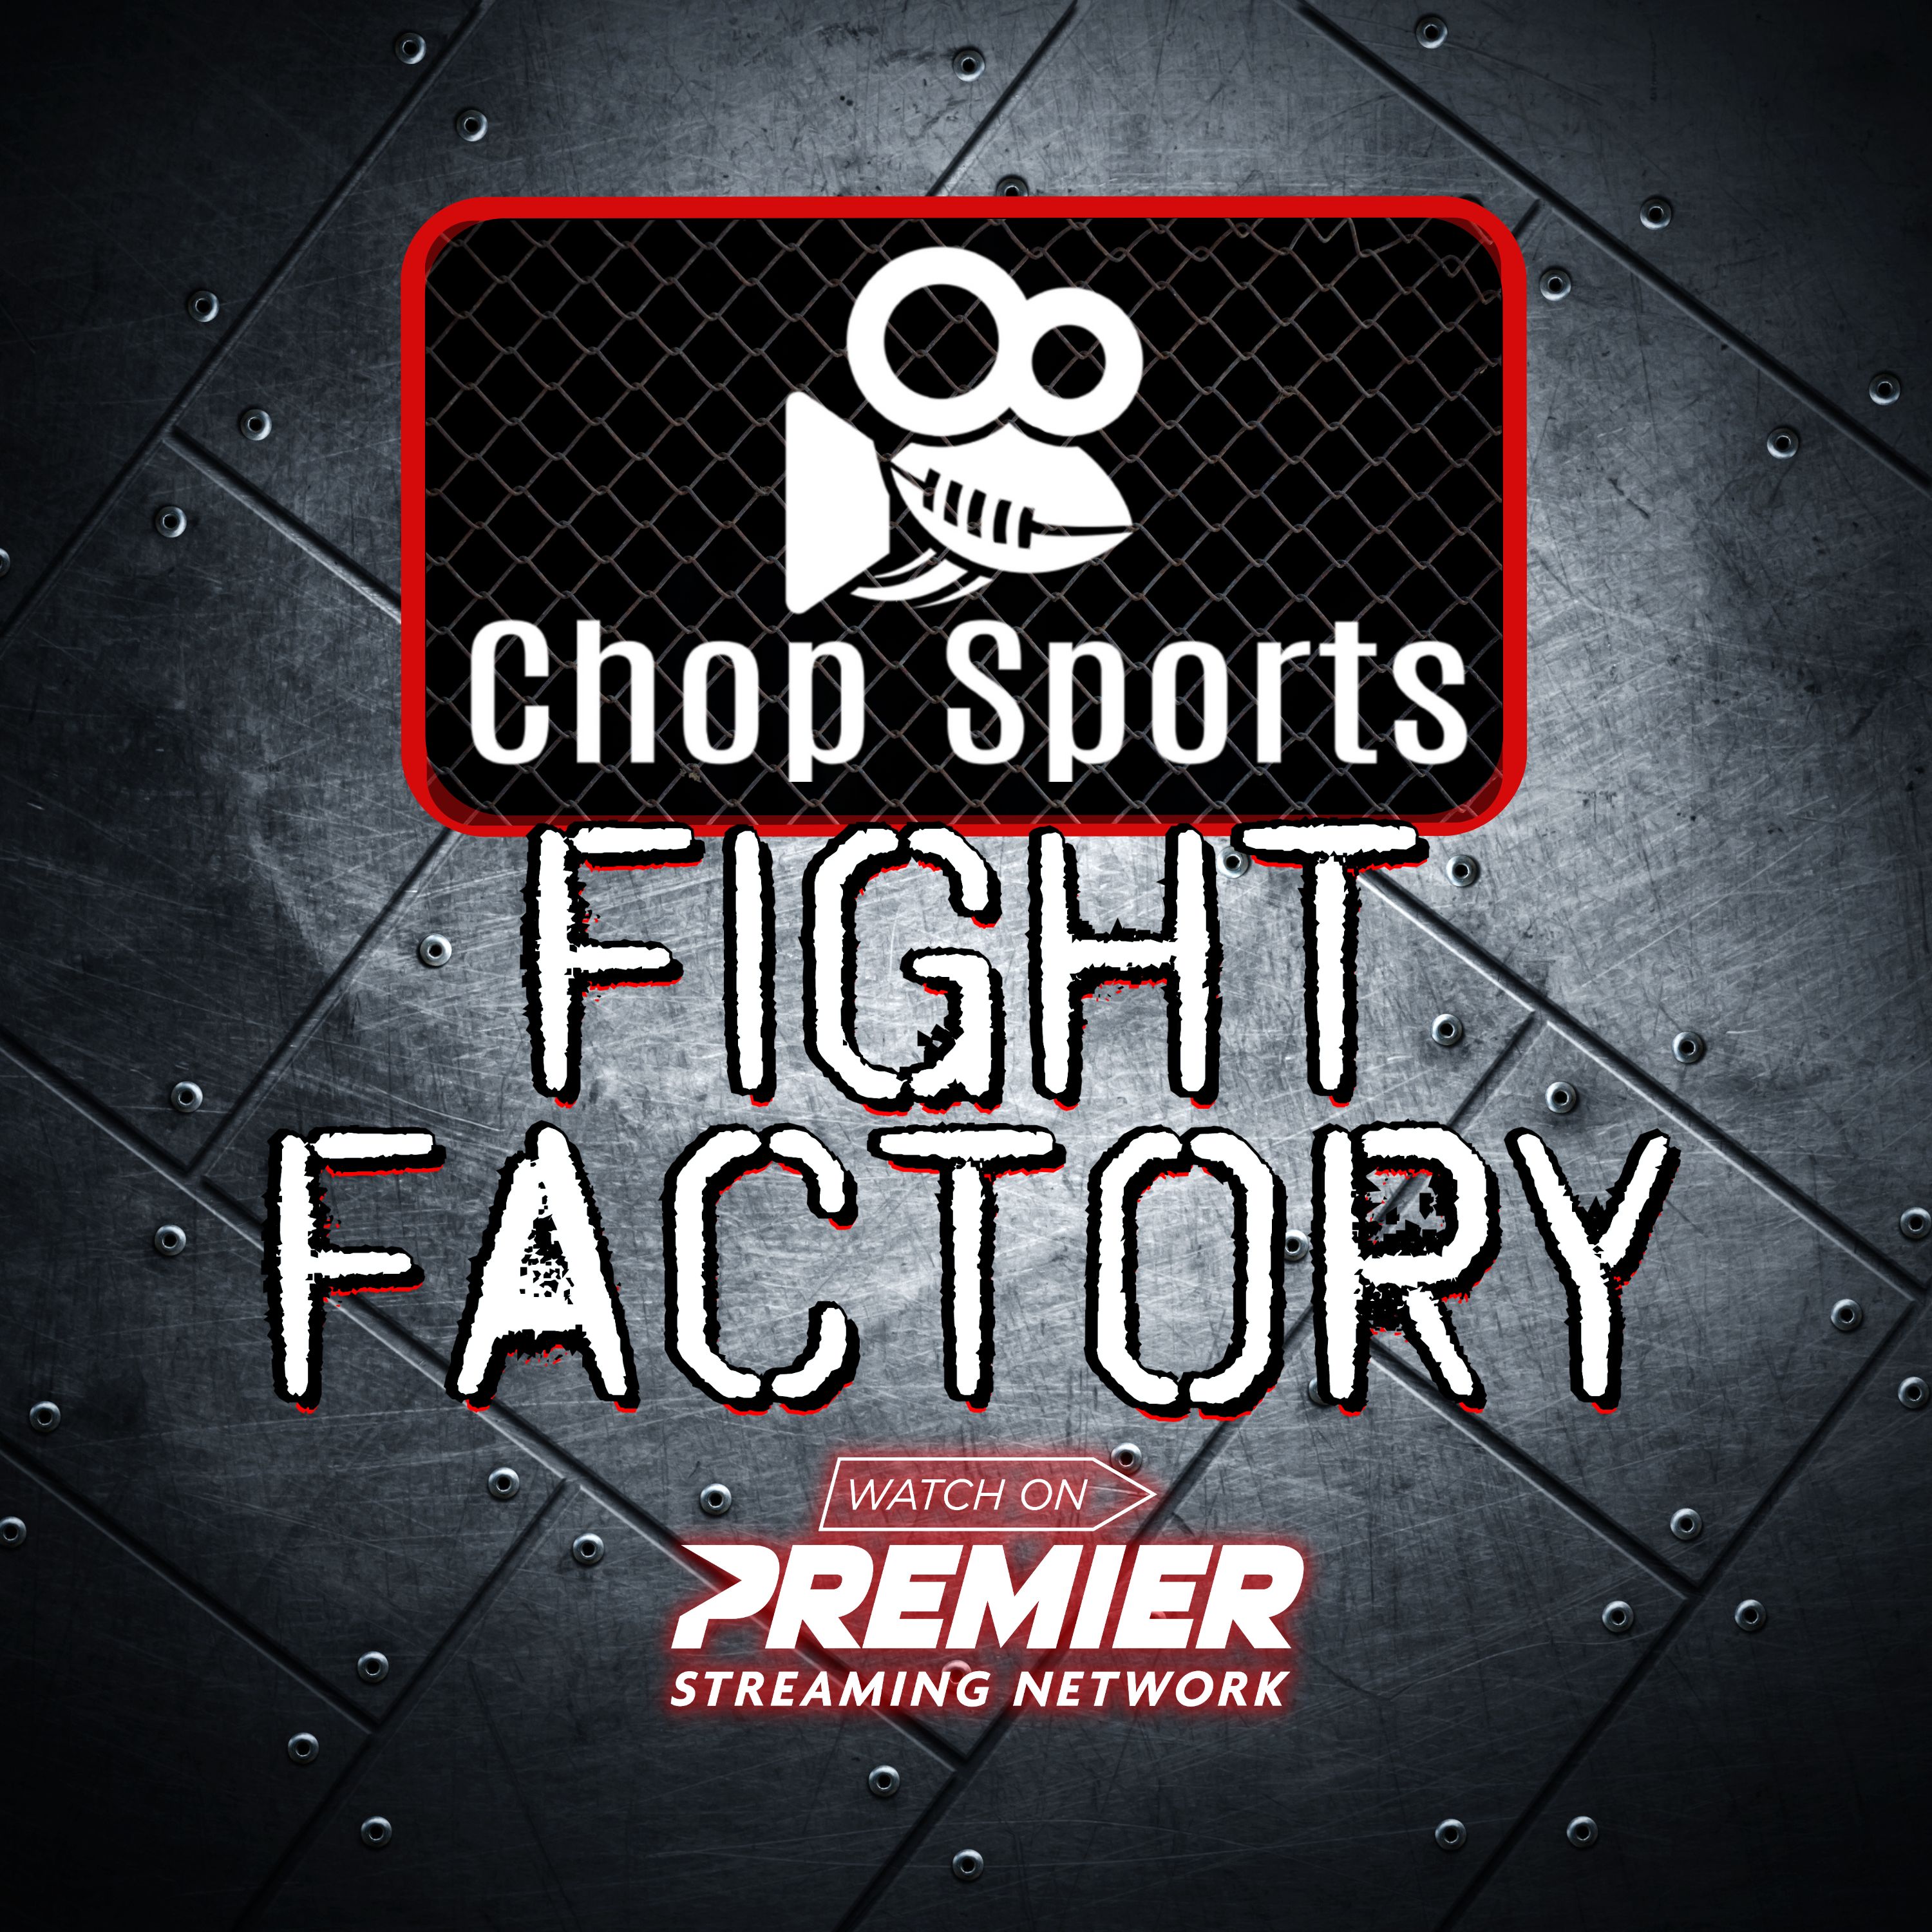 Artwork for podcast Chop Sports Fight Factory